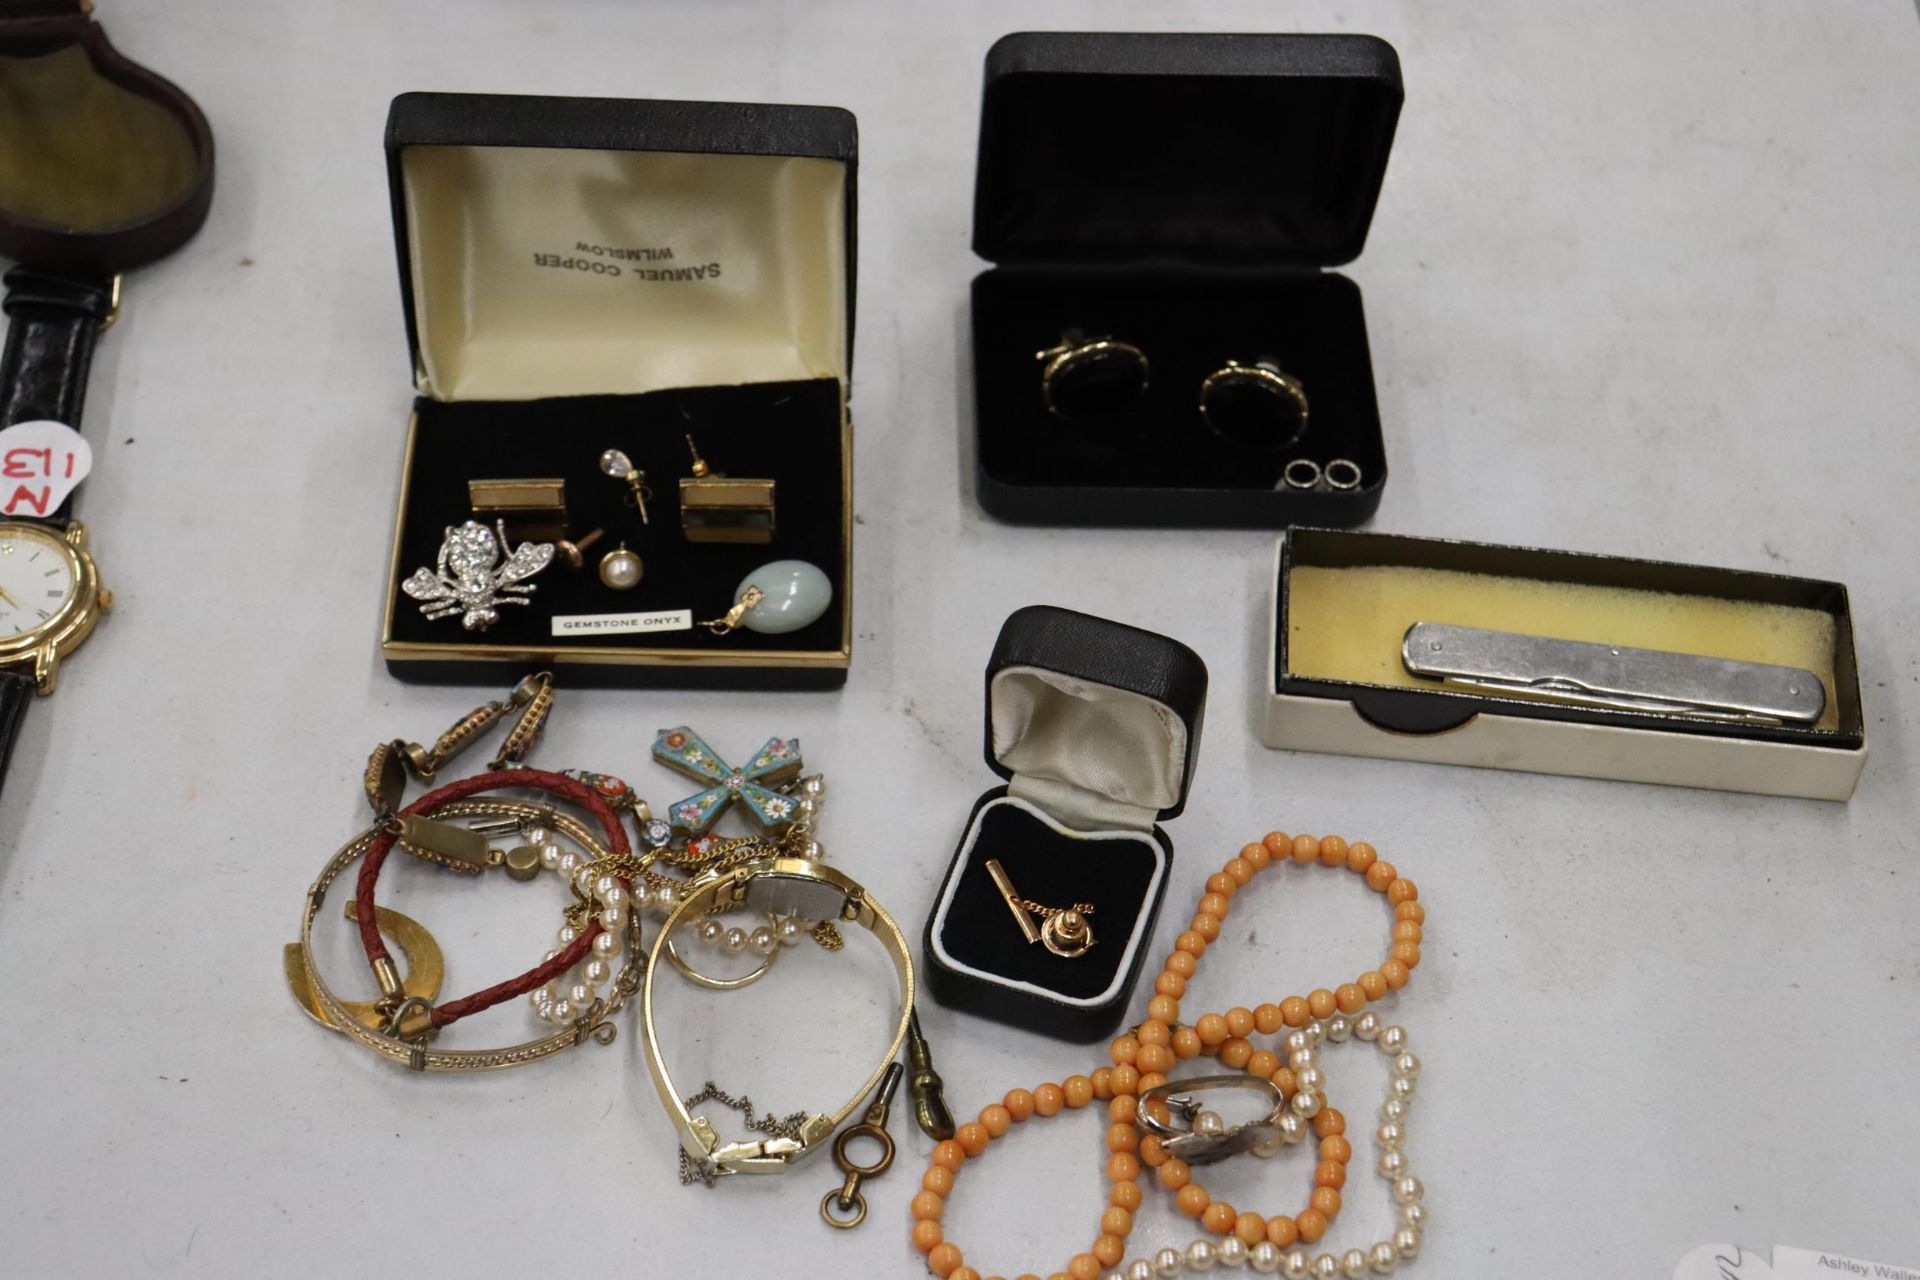 A QUANTITY OF COSTUME JEWELLERY TO INCLUDE BRACELETS, BOXED CUFFLINKS, A WATCH, PENKNIFE, ETC